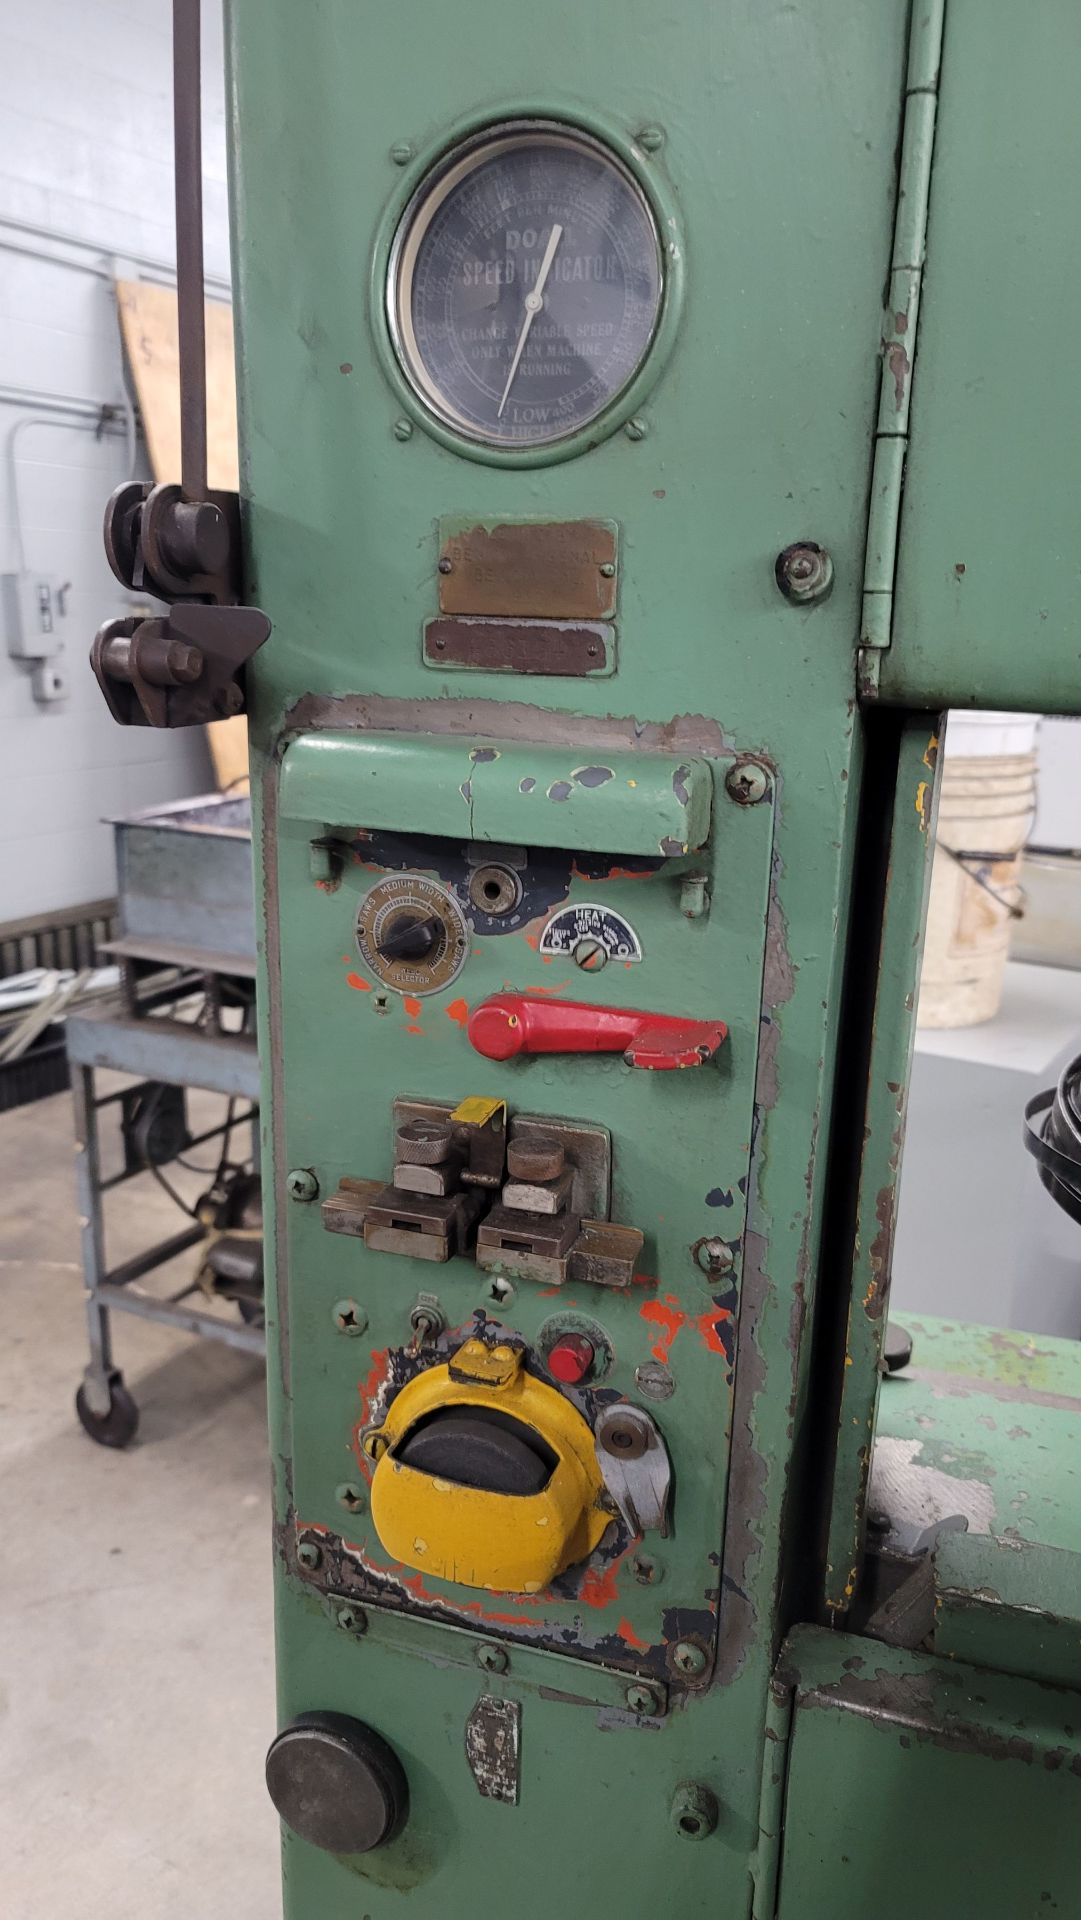 DOALL ML-16 VERTICAL BAND SAW, S/N 436154, W/ BLADE WELDER AND GRINDER - Image 3 of 4